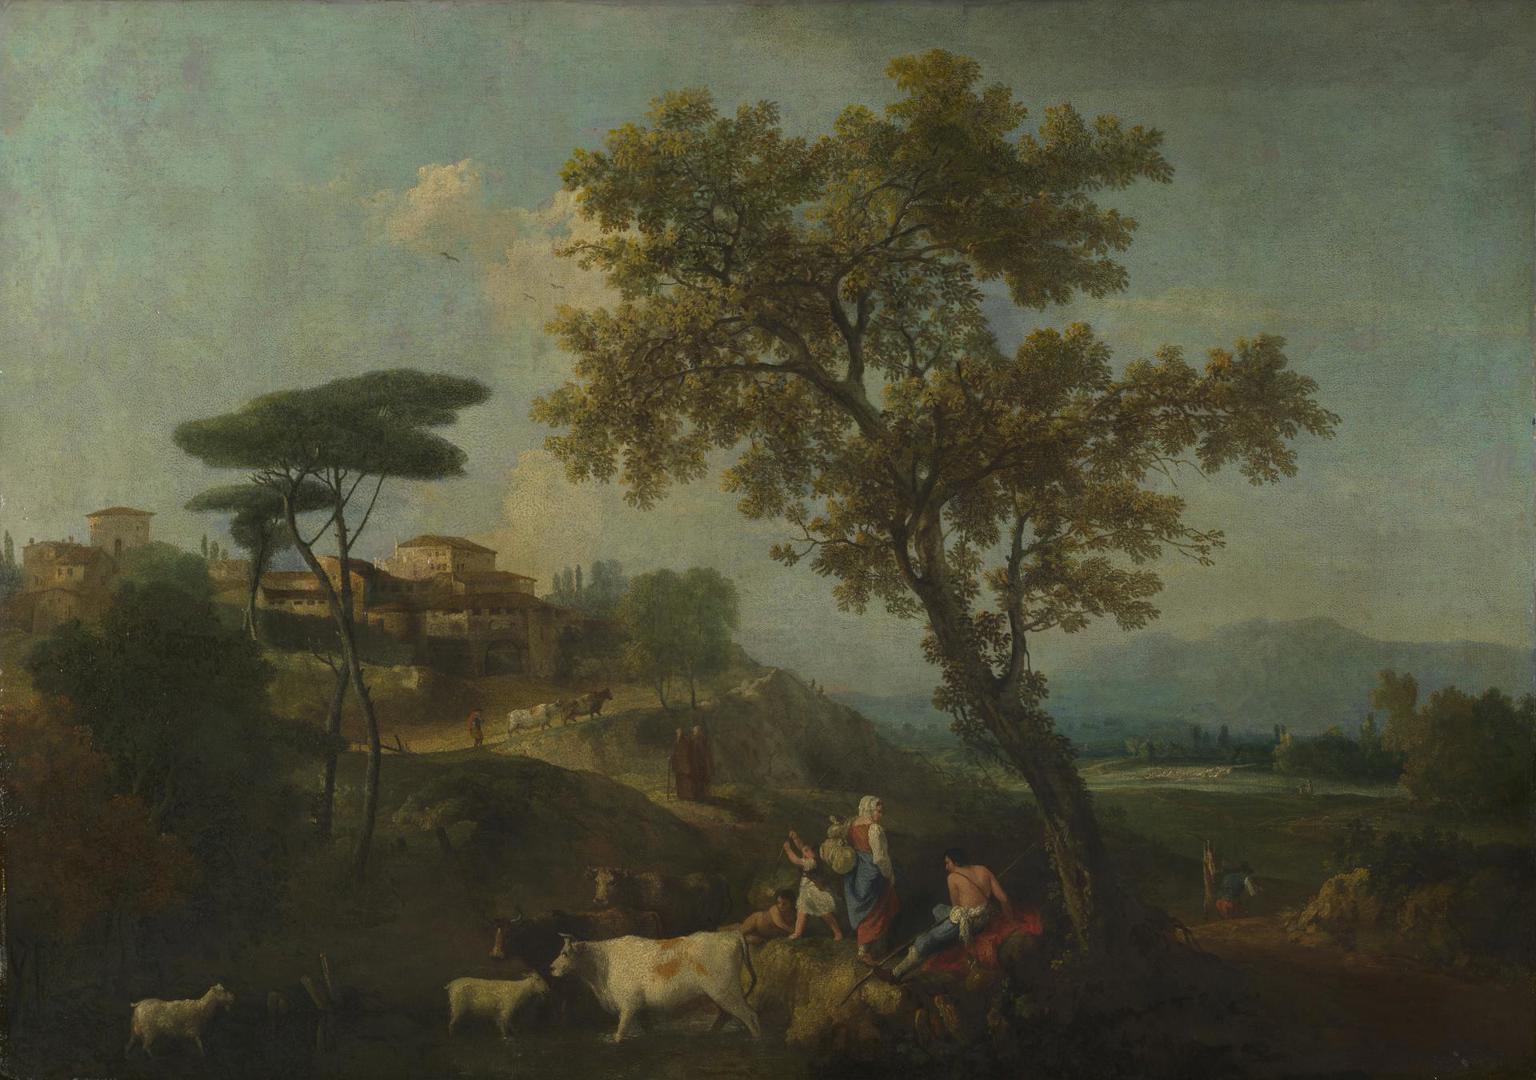 Landscape with Cattle and Figures by Francesco Zuccarelli